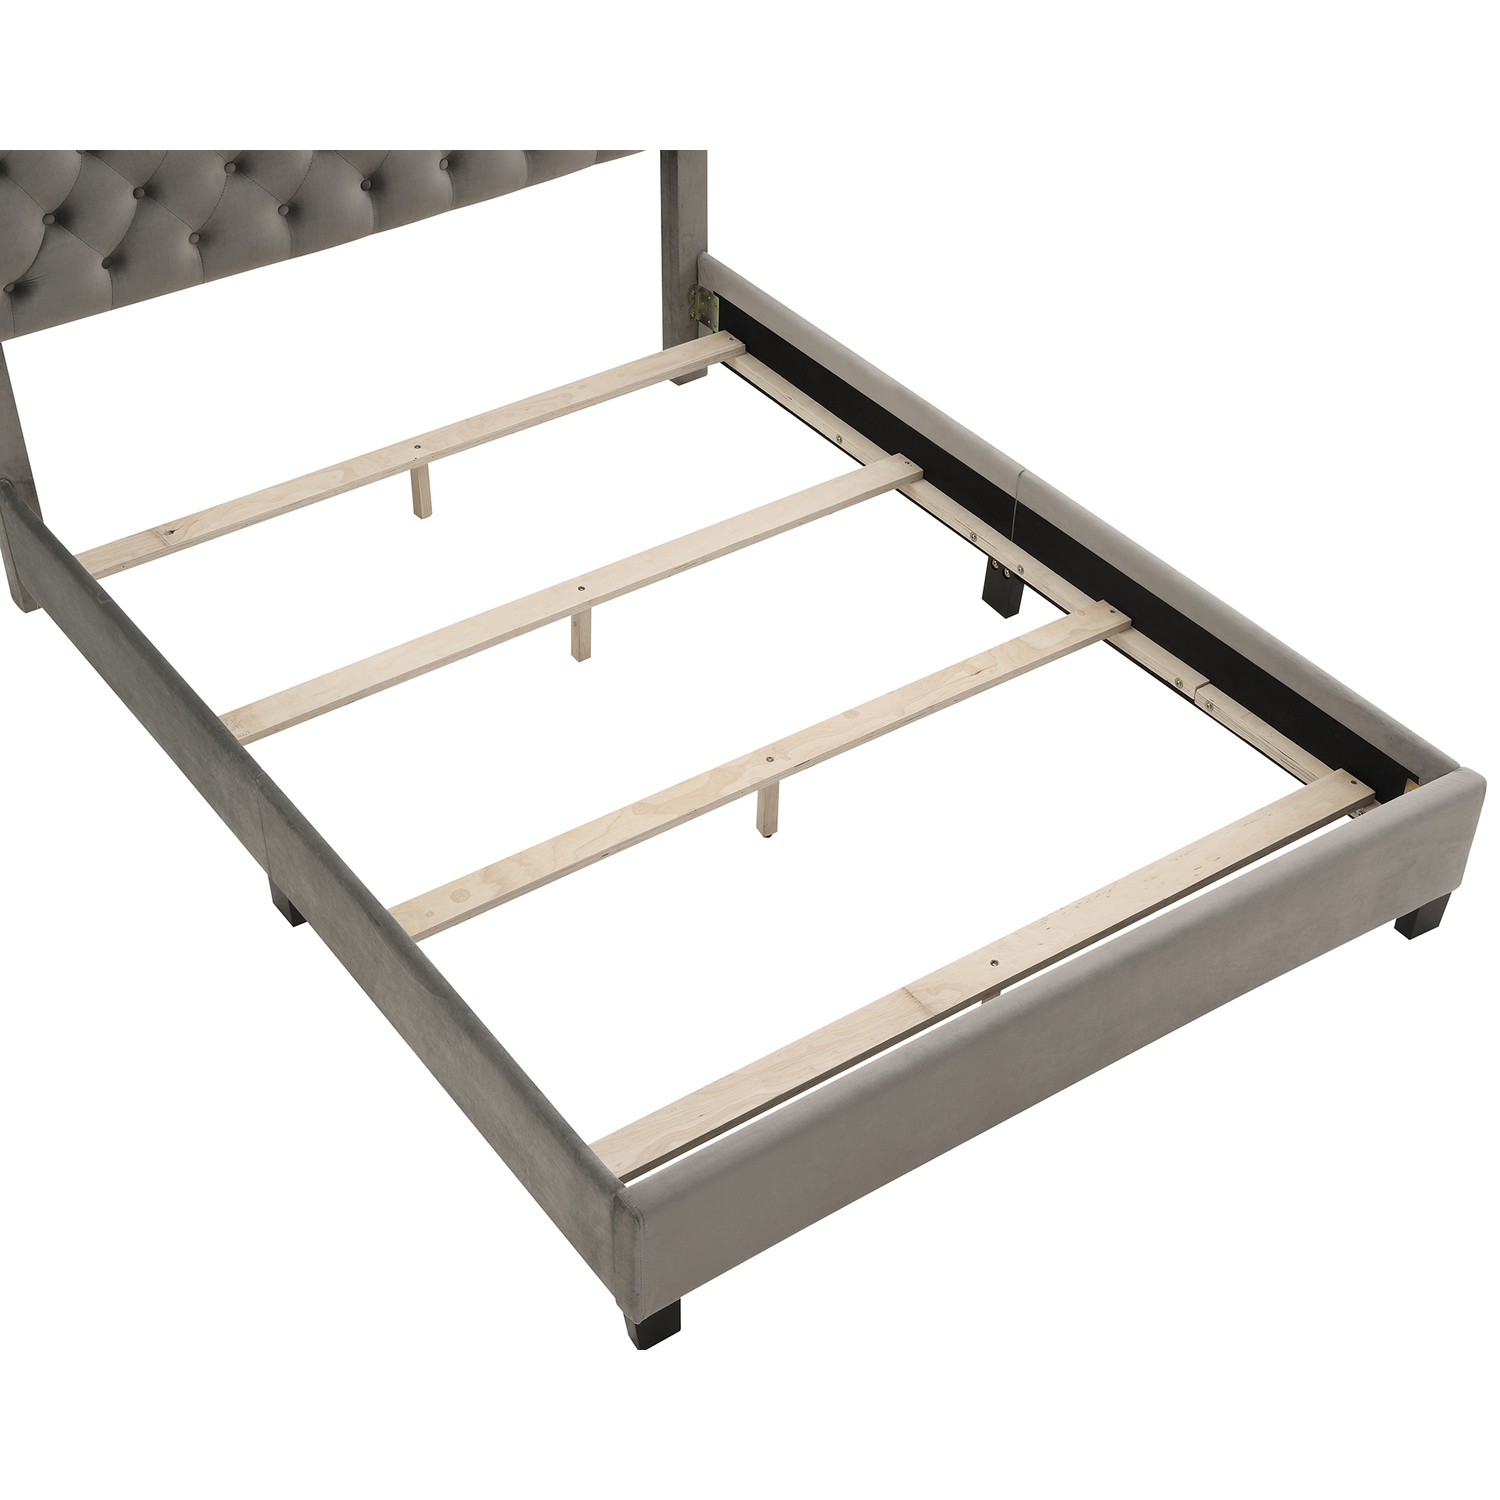 Nspire 101-292Q-GY 60 in. Greta Bed in Grey - Queen Size - image 2 of 6